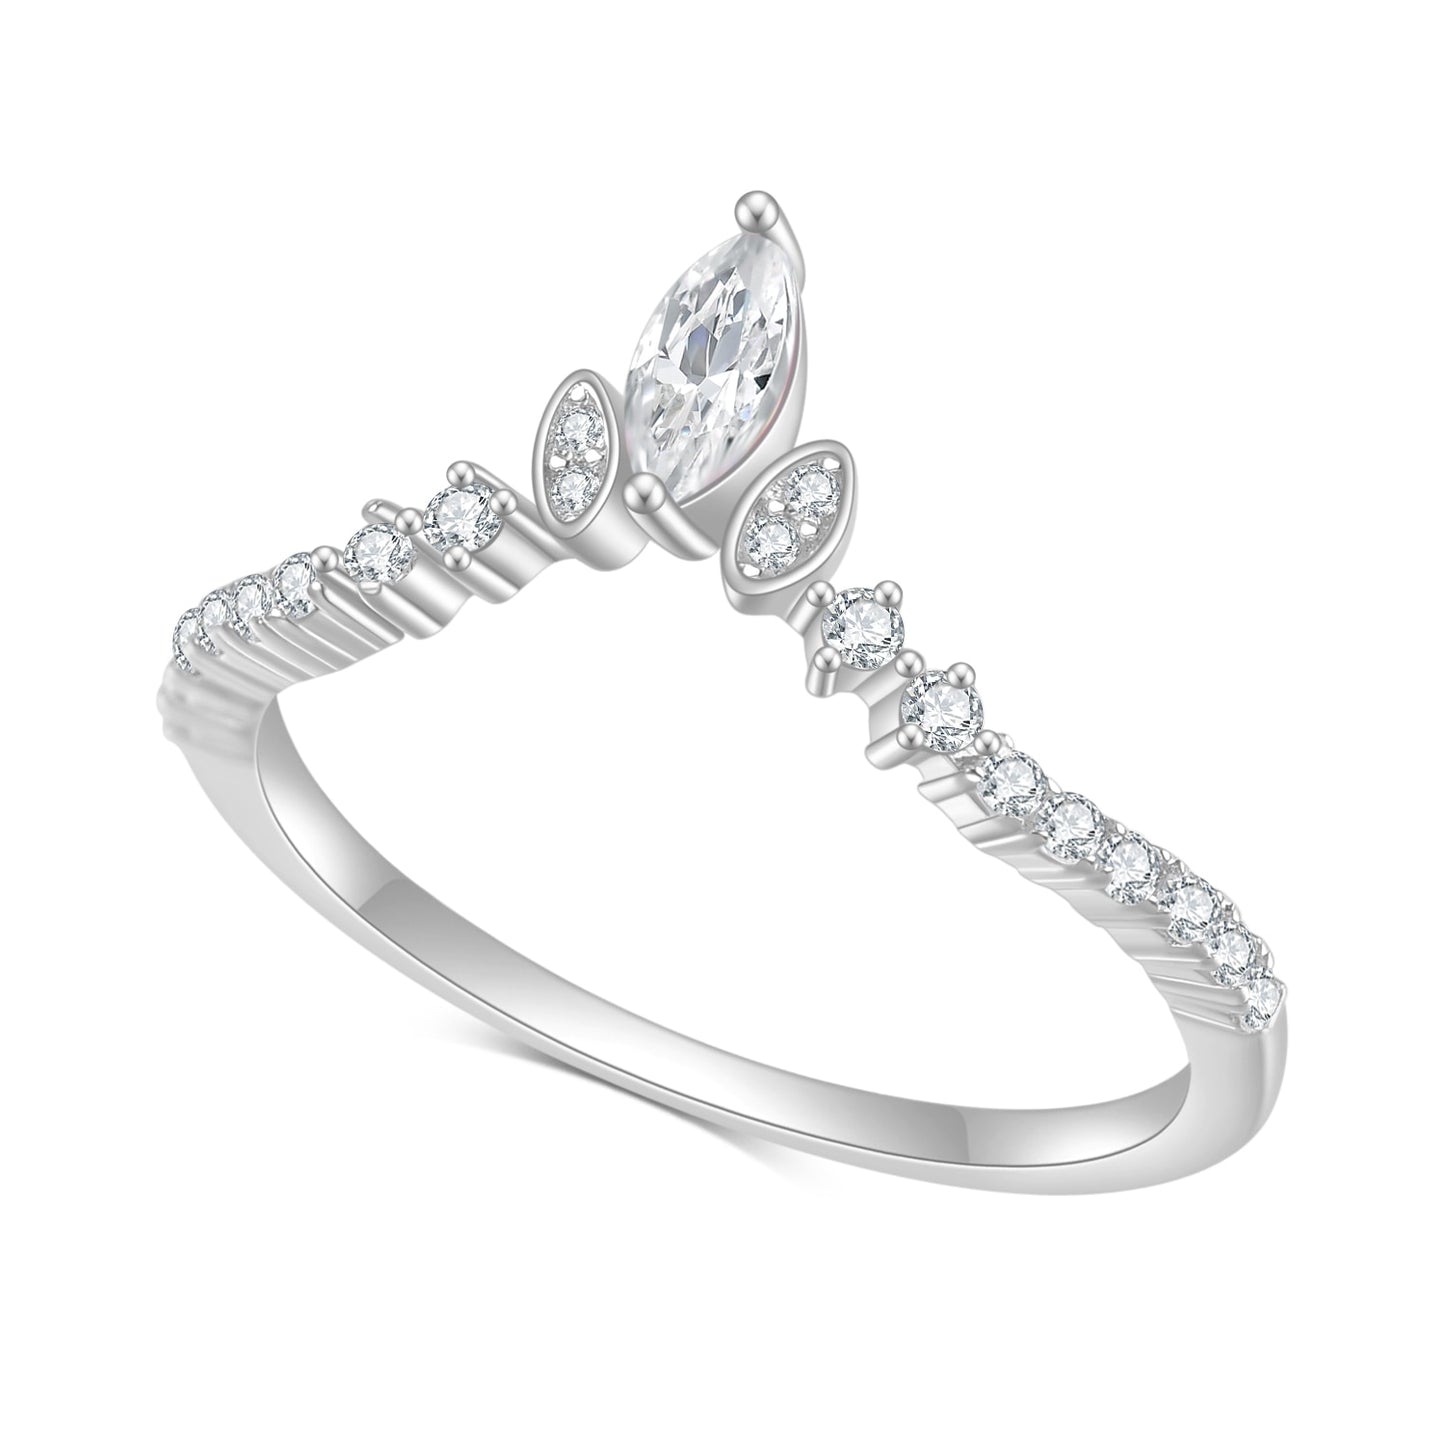 A silver chevron style wedding ring set with several small round moissanites set horizontally and two bezel set moissanites and one larger prong set moissanite at the V.